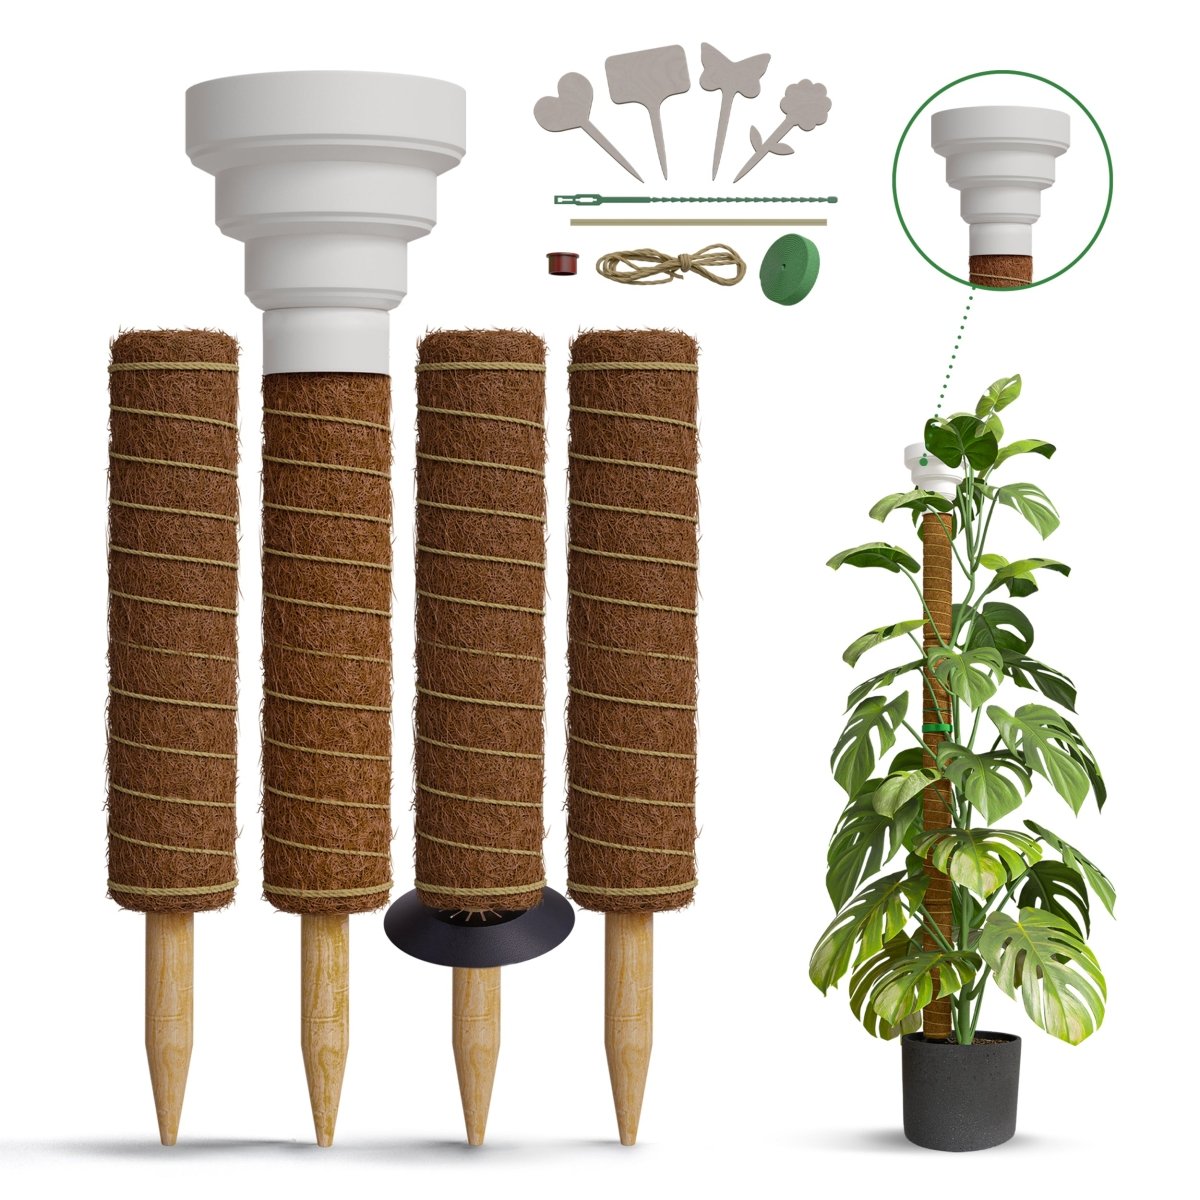 Moss Pole Monstera Plant Support Stakes - 2x26.4 or 48.7" Unique Self-Watering, Extendable Coco Coir Pole for Climbing Plant Supports for Potted Plants Indoor, Totem Pole for Monstera, Pothos & More - Organo Republic